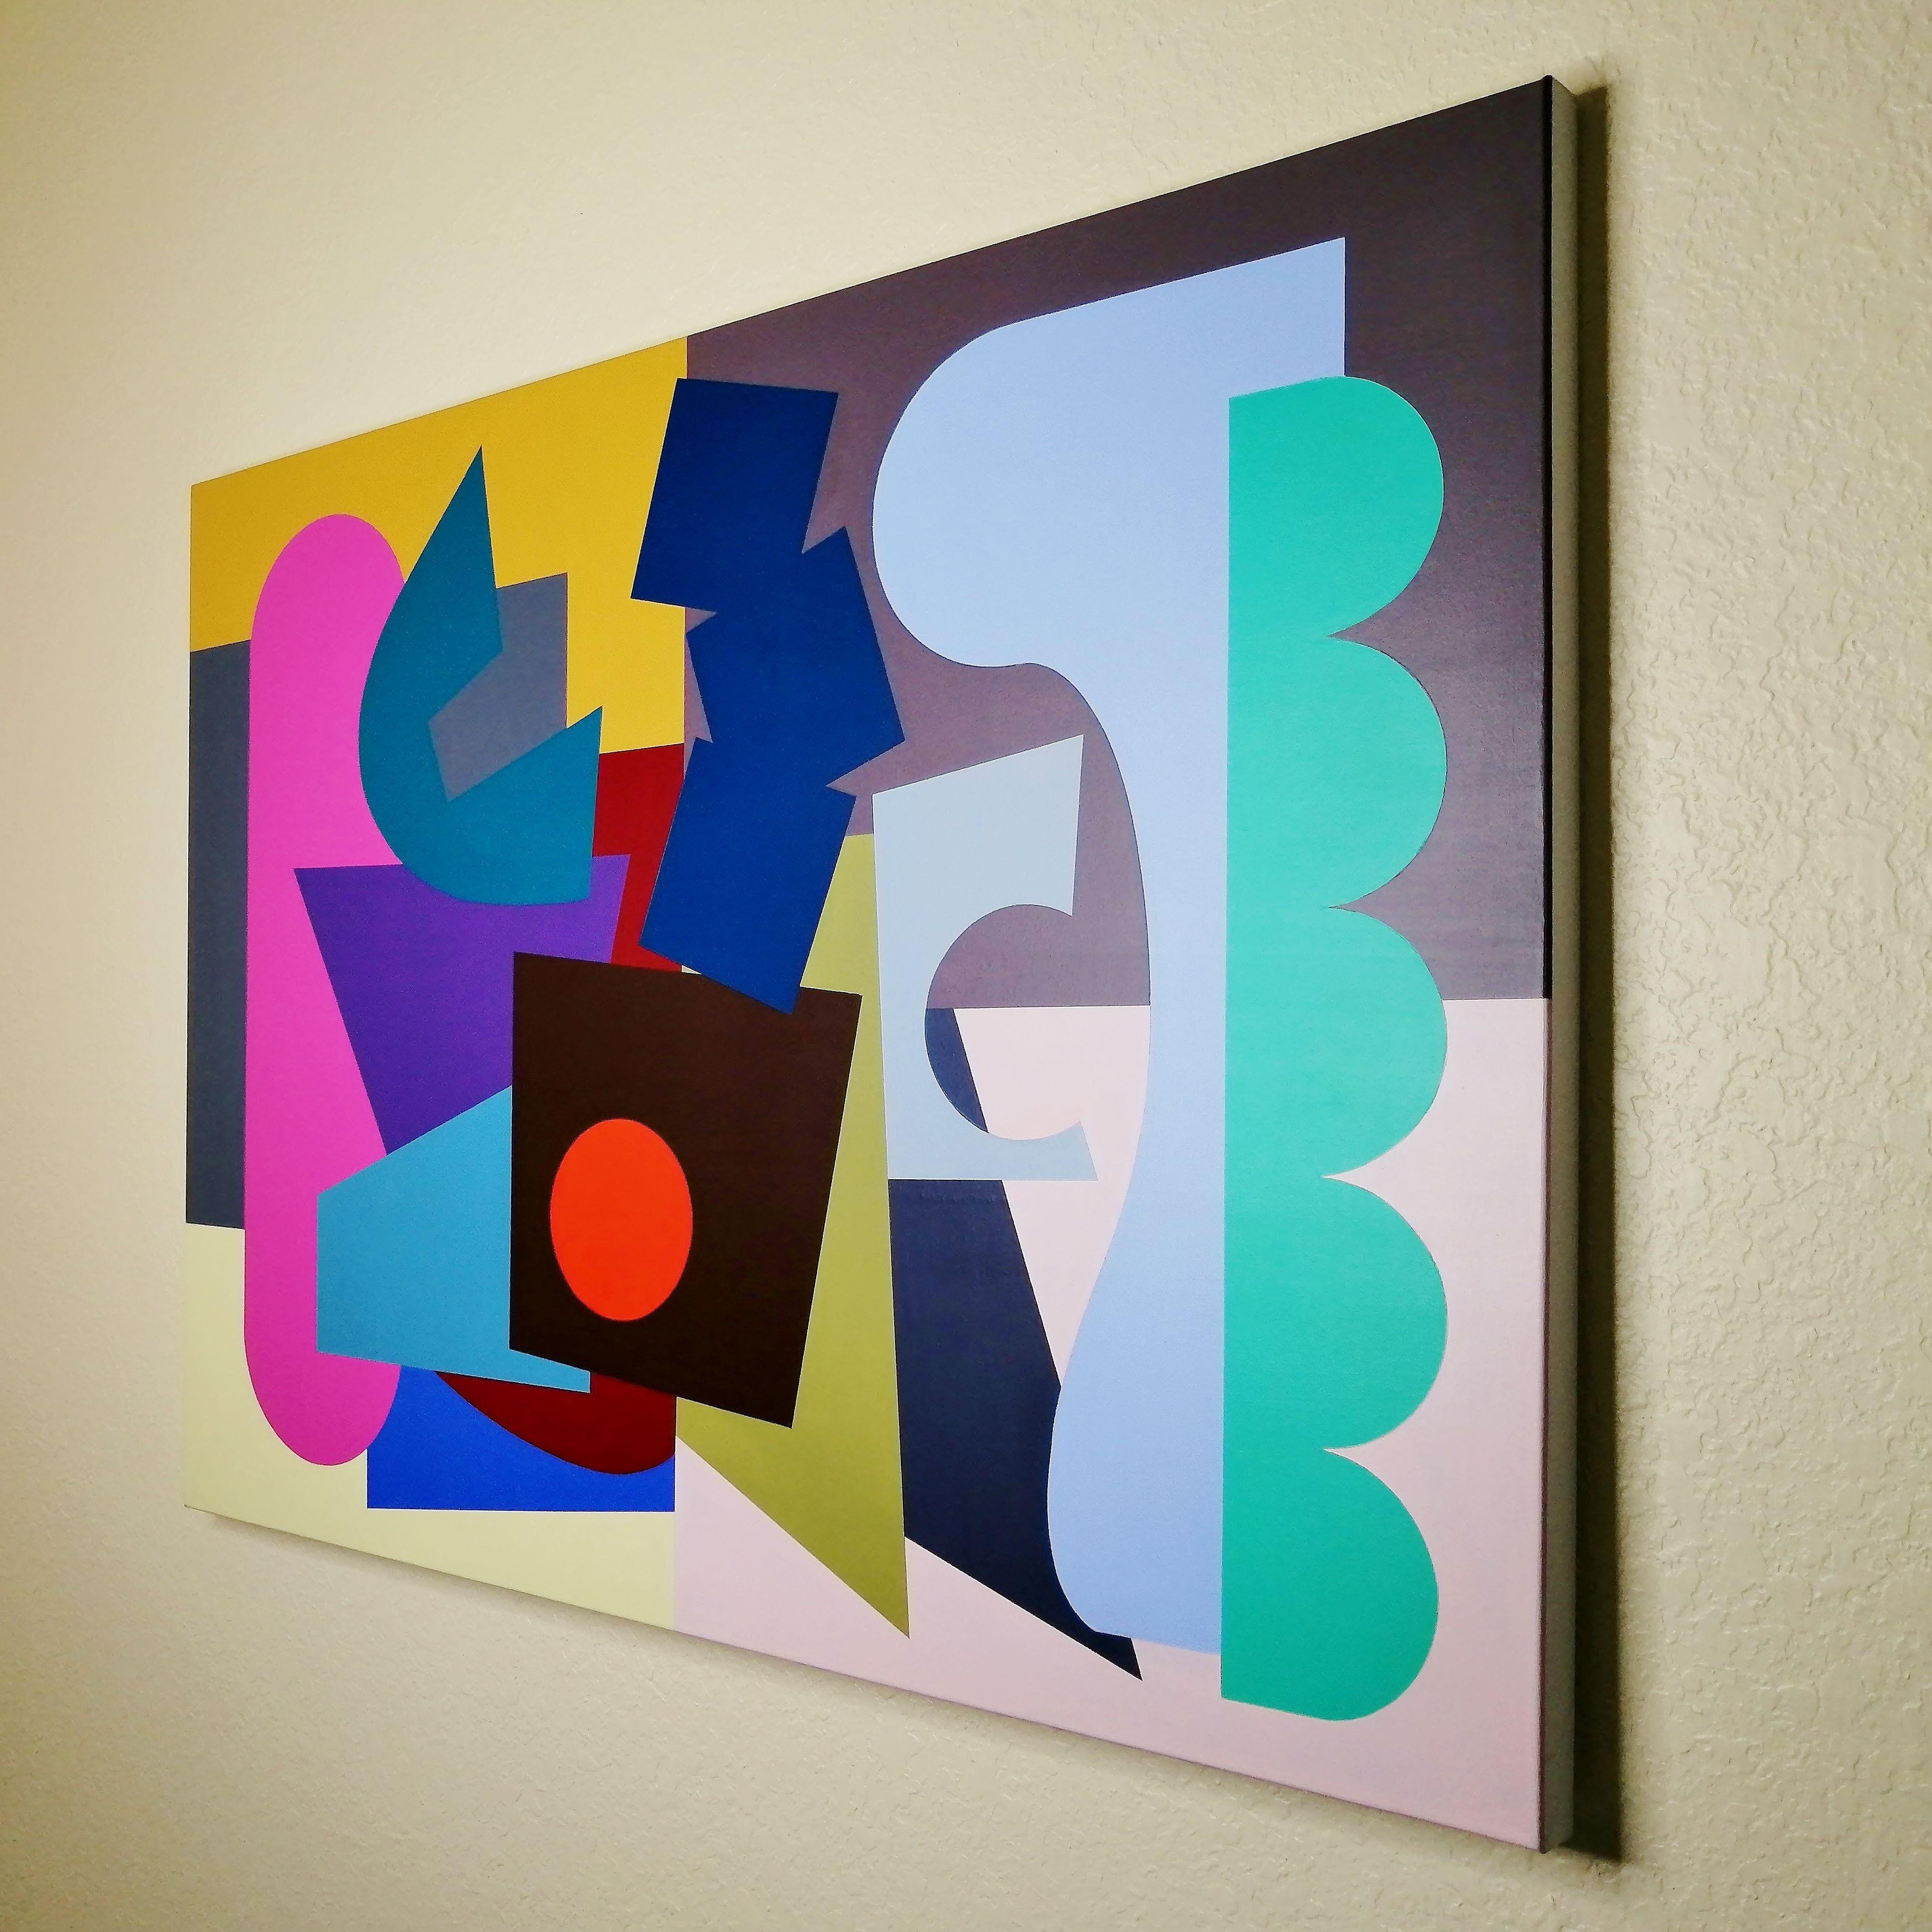 This painting takes a look back at two paintings from 2015, The Conversation, and The Dance and Conversation II from 2020. Using the motifs of modern abstract art, I employed hard-edged, minimal, geometric and Cubist shapes, triangles, circles, and